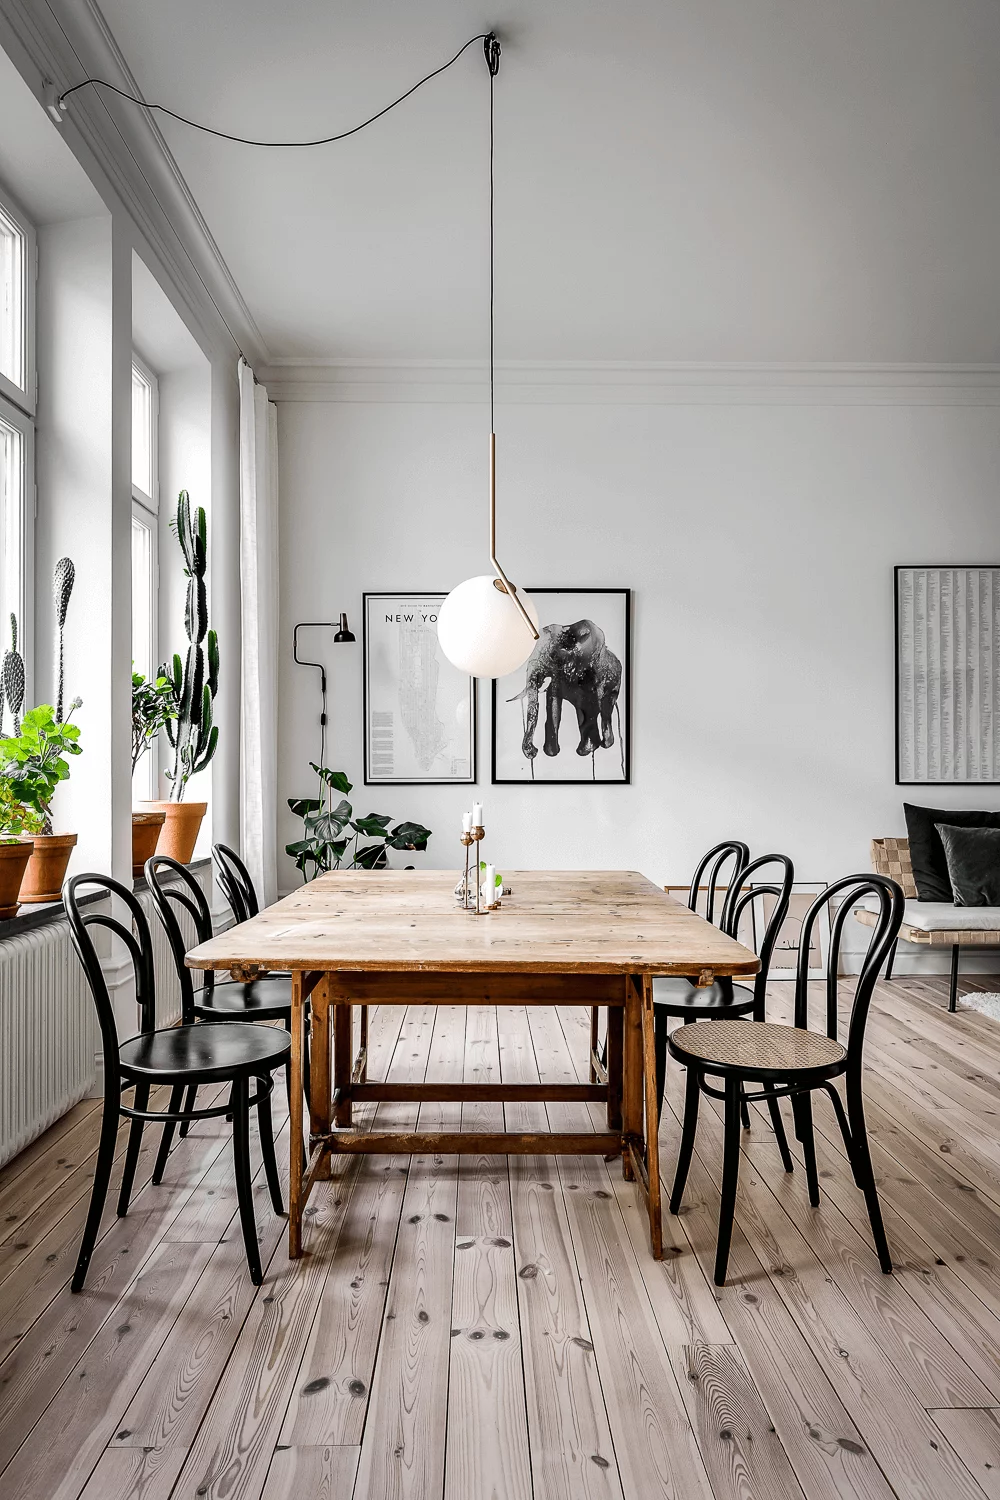 this is one of the characteristics of Scandinavian interiors, reclaimed wood style with wooden floors and wooden table(1)